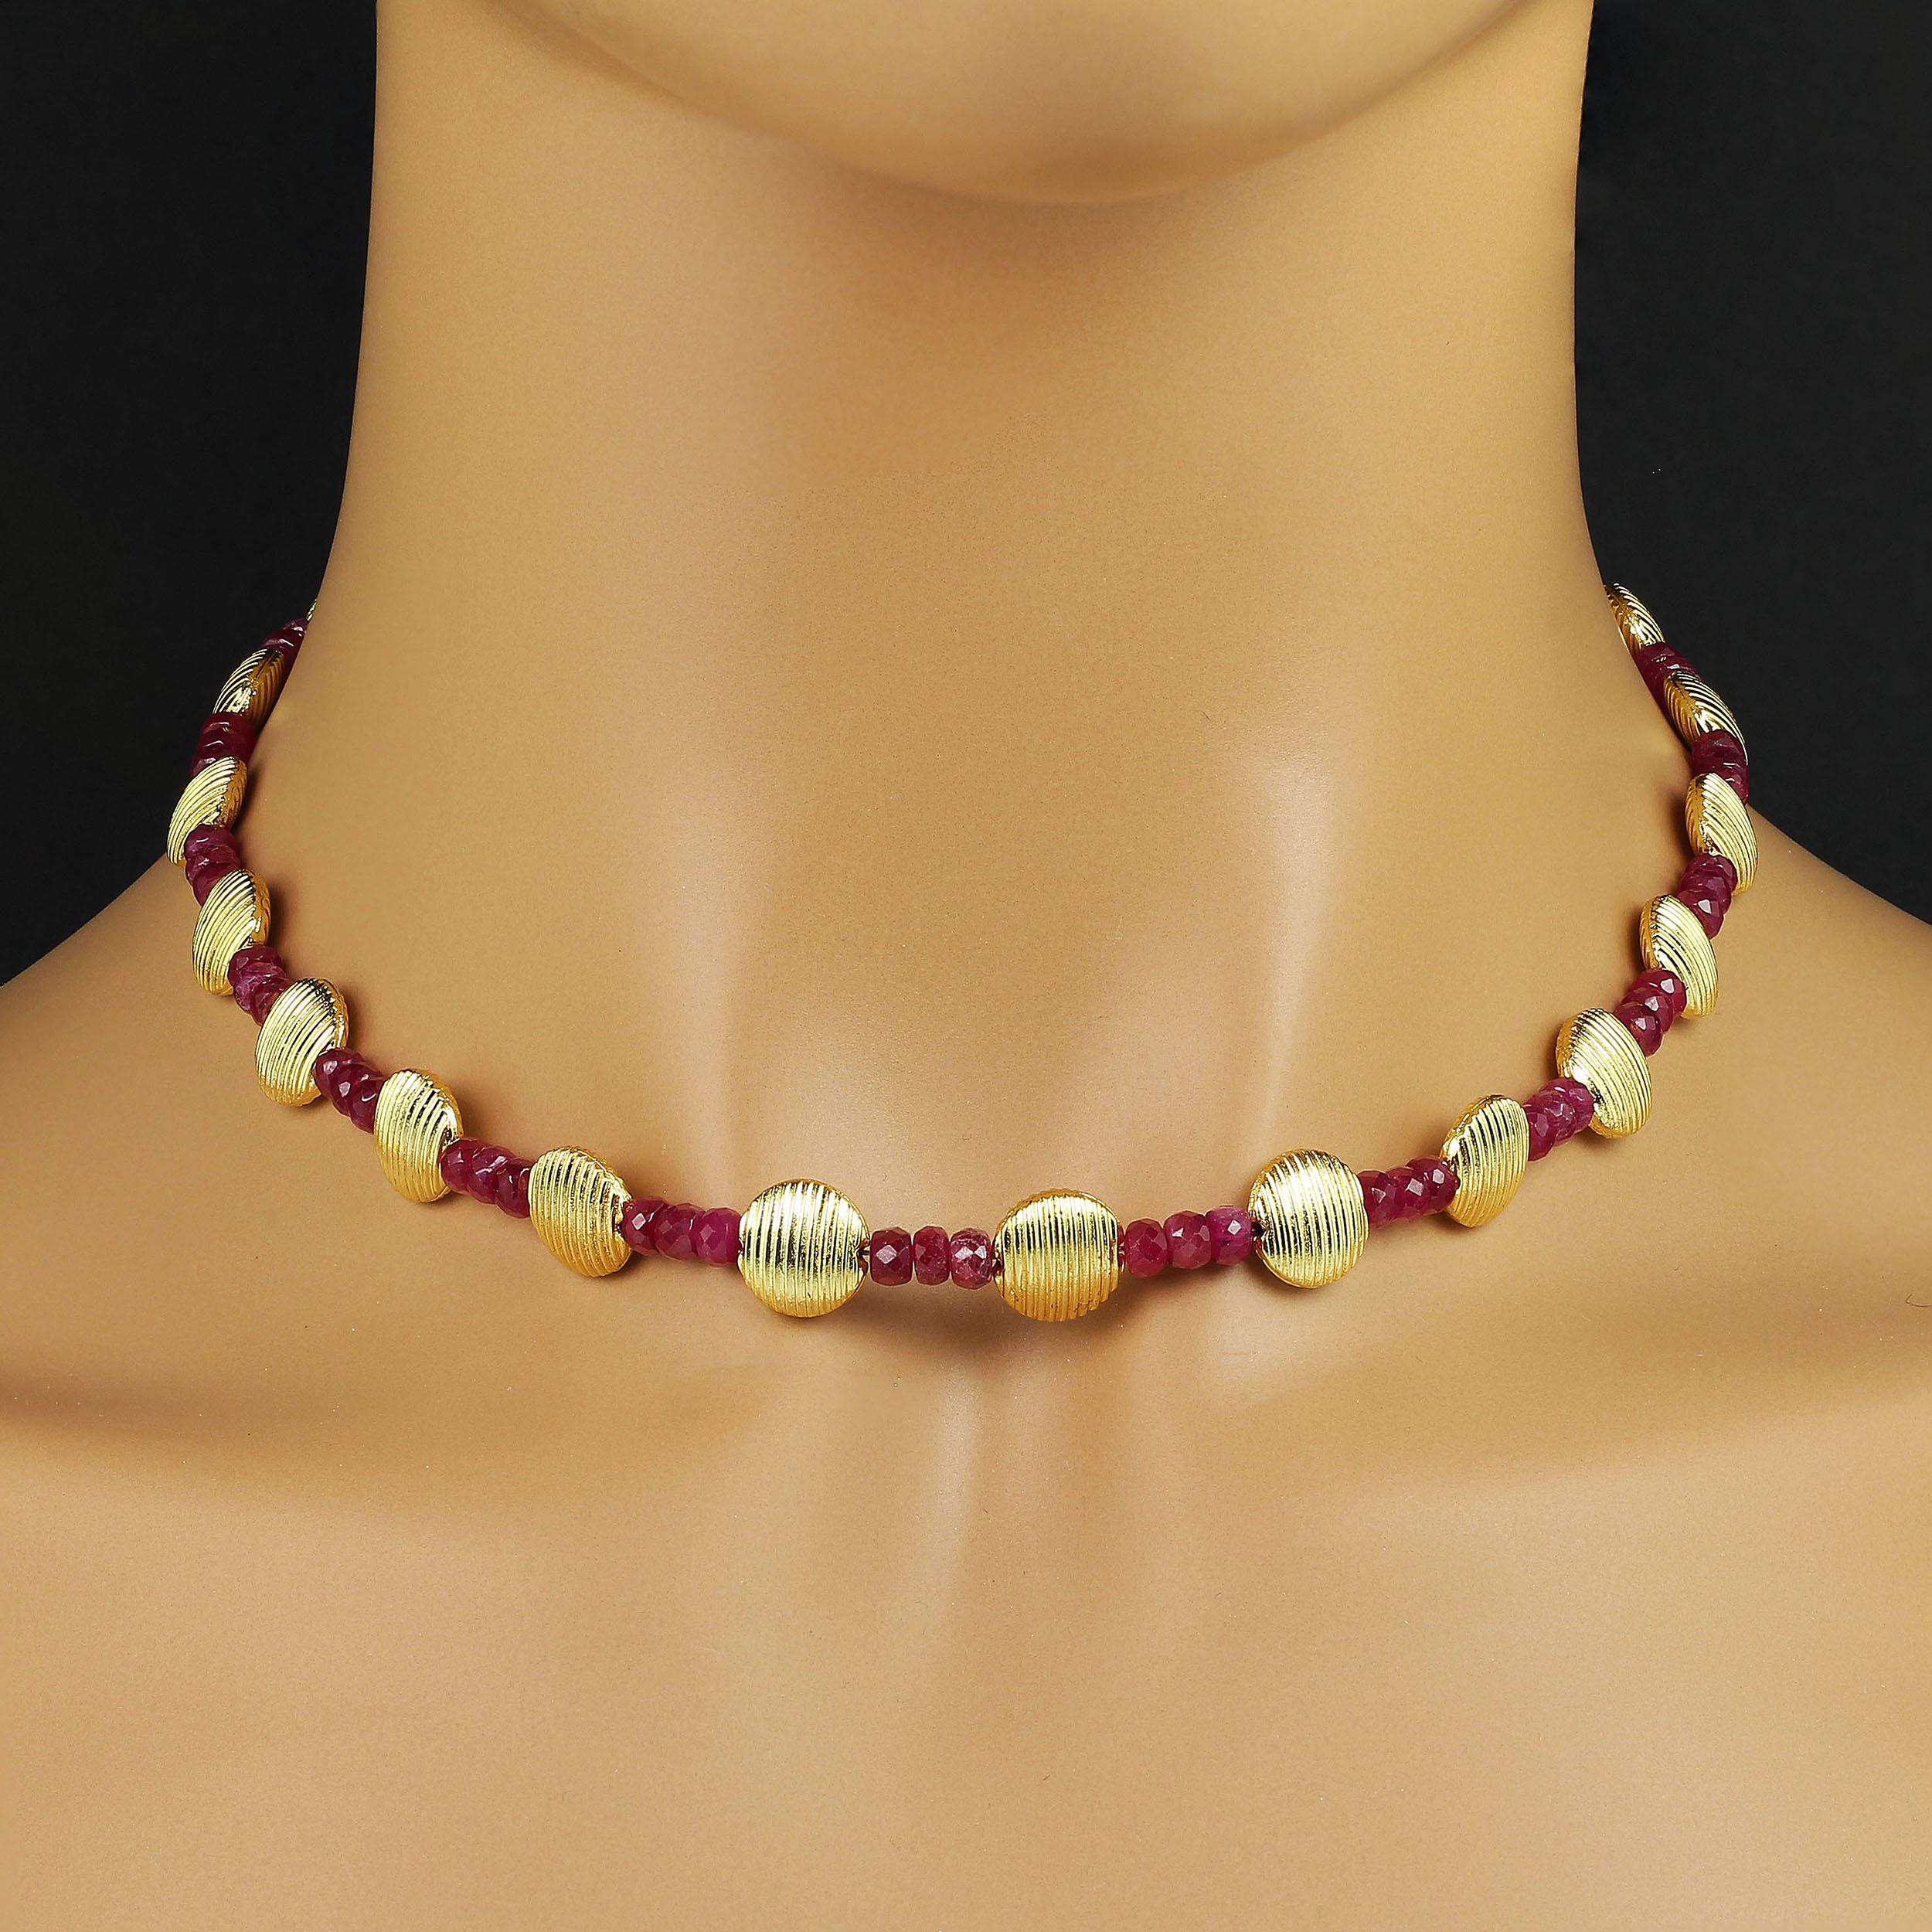  AJD 17 Inch Ruby and Gold Choker Necklace 1